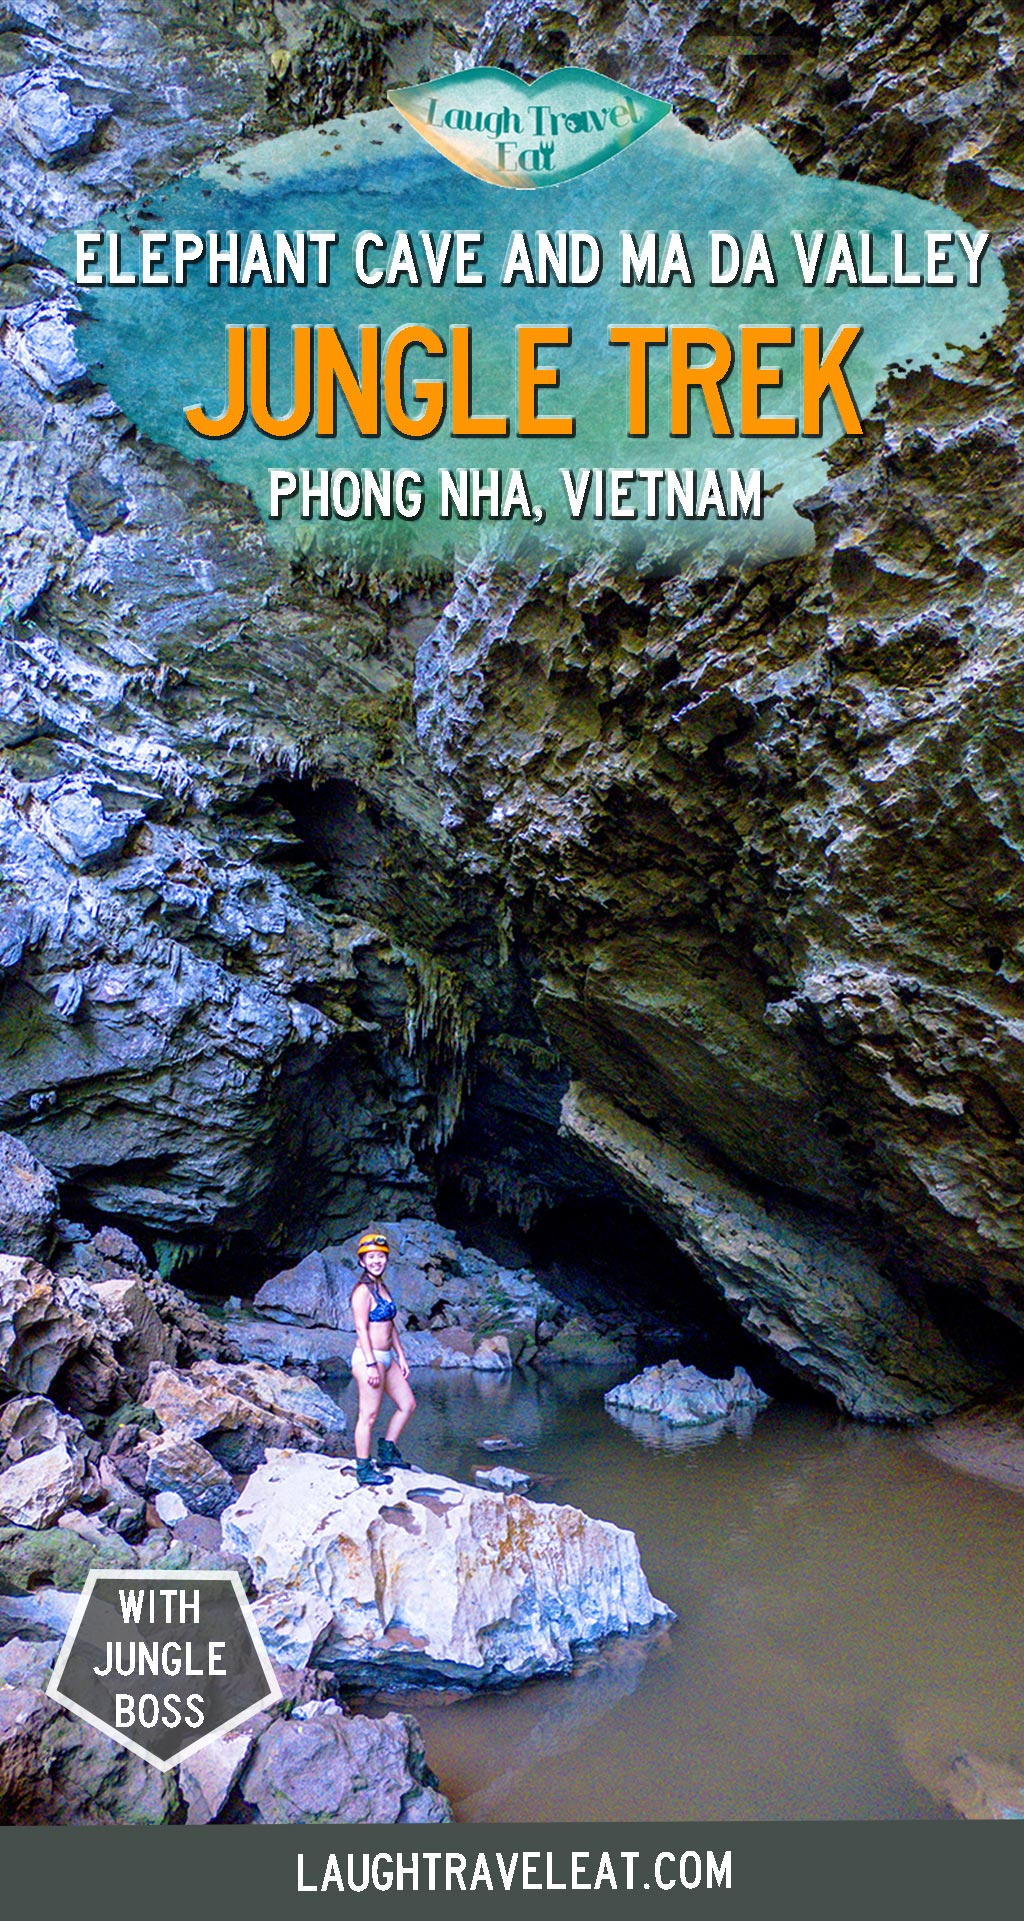 Aside from visiting the caves in Phong Nha, Vietnam, jungle trekking is a popular activity. If you are looking for something a little more adventurous, I highly recommend Elephant Cave and Ma Da Valley day trek by Jungle Boss. Here is why: #PhongNha #Vietnam #JungleTrek #Trek